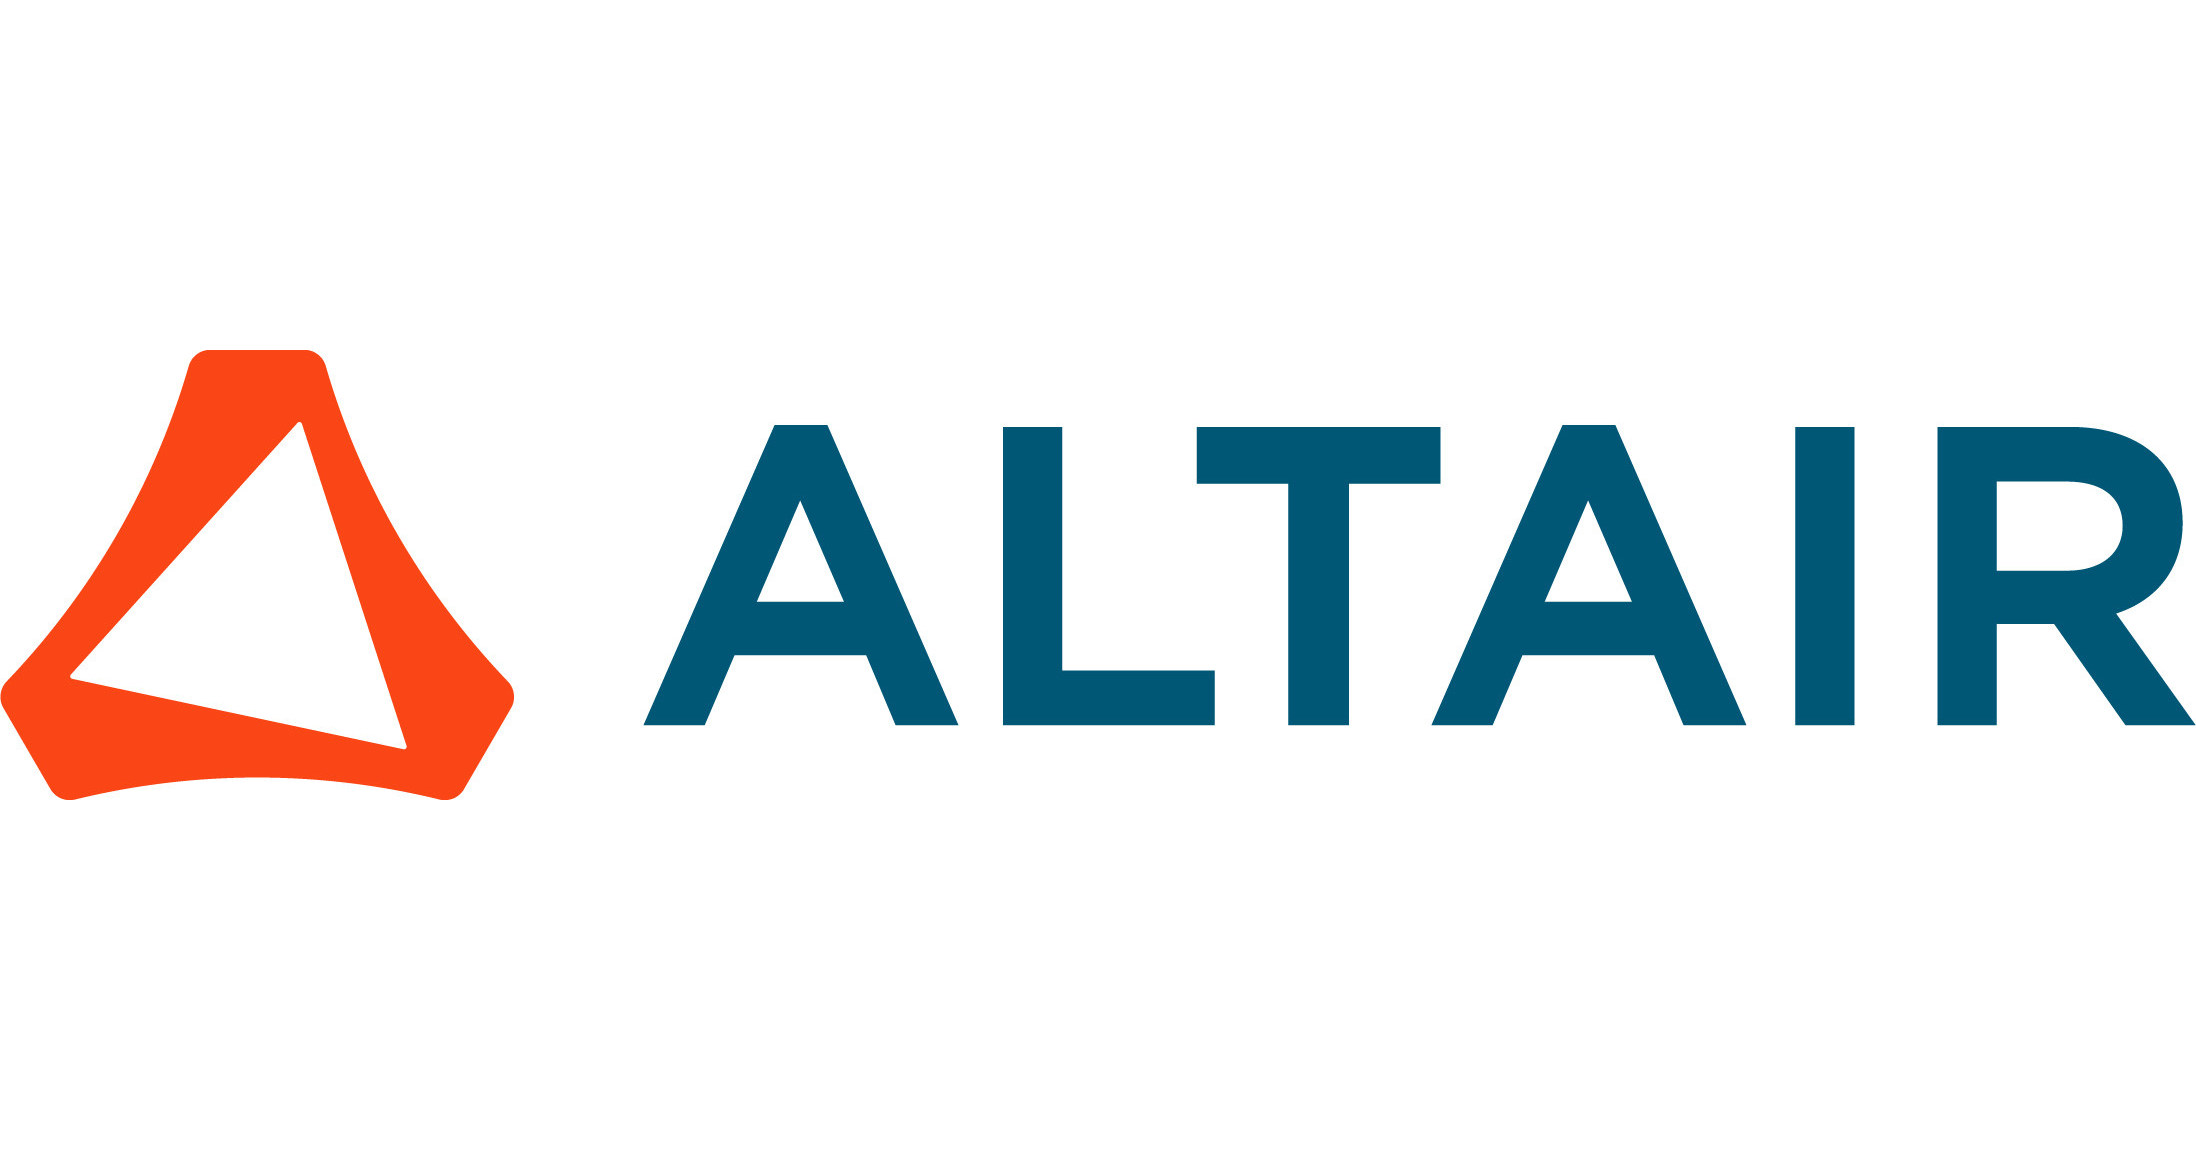 Altair PollEx for Altium, First in Series, Launched for Printed Circuit Board Design